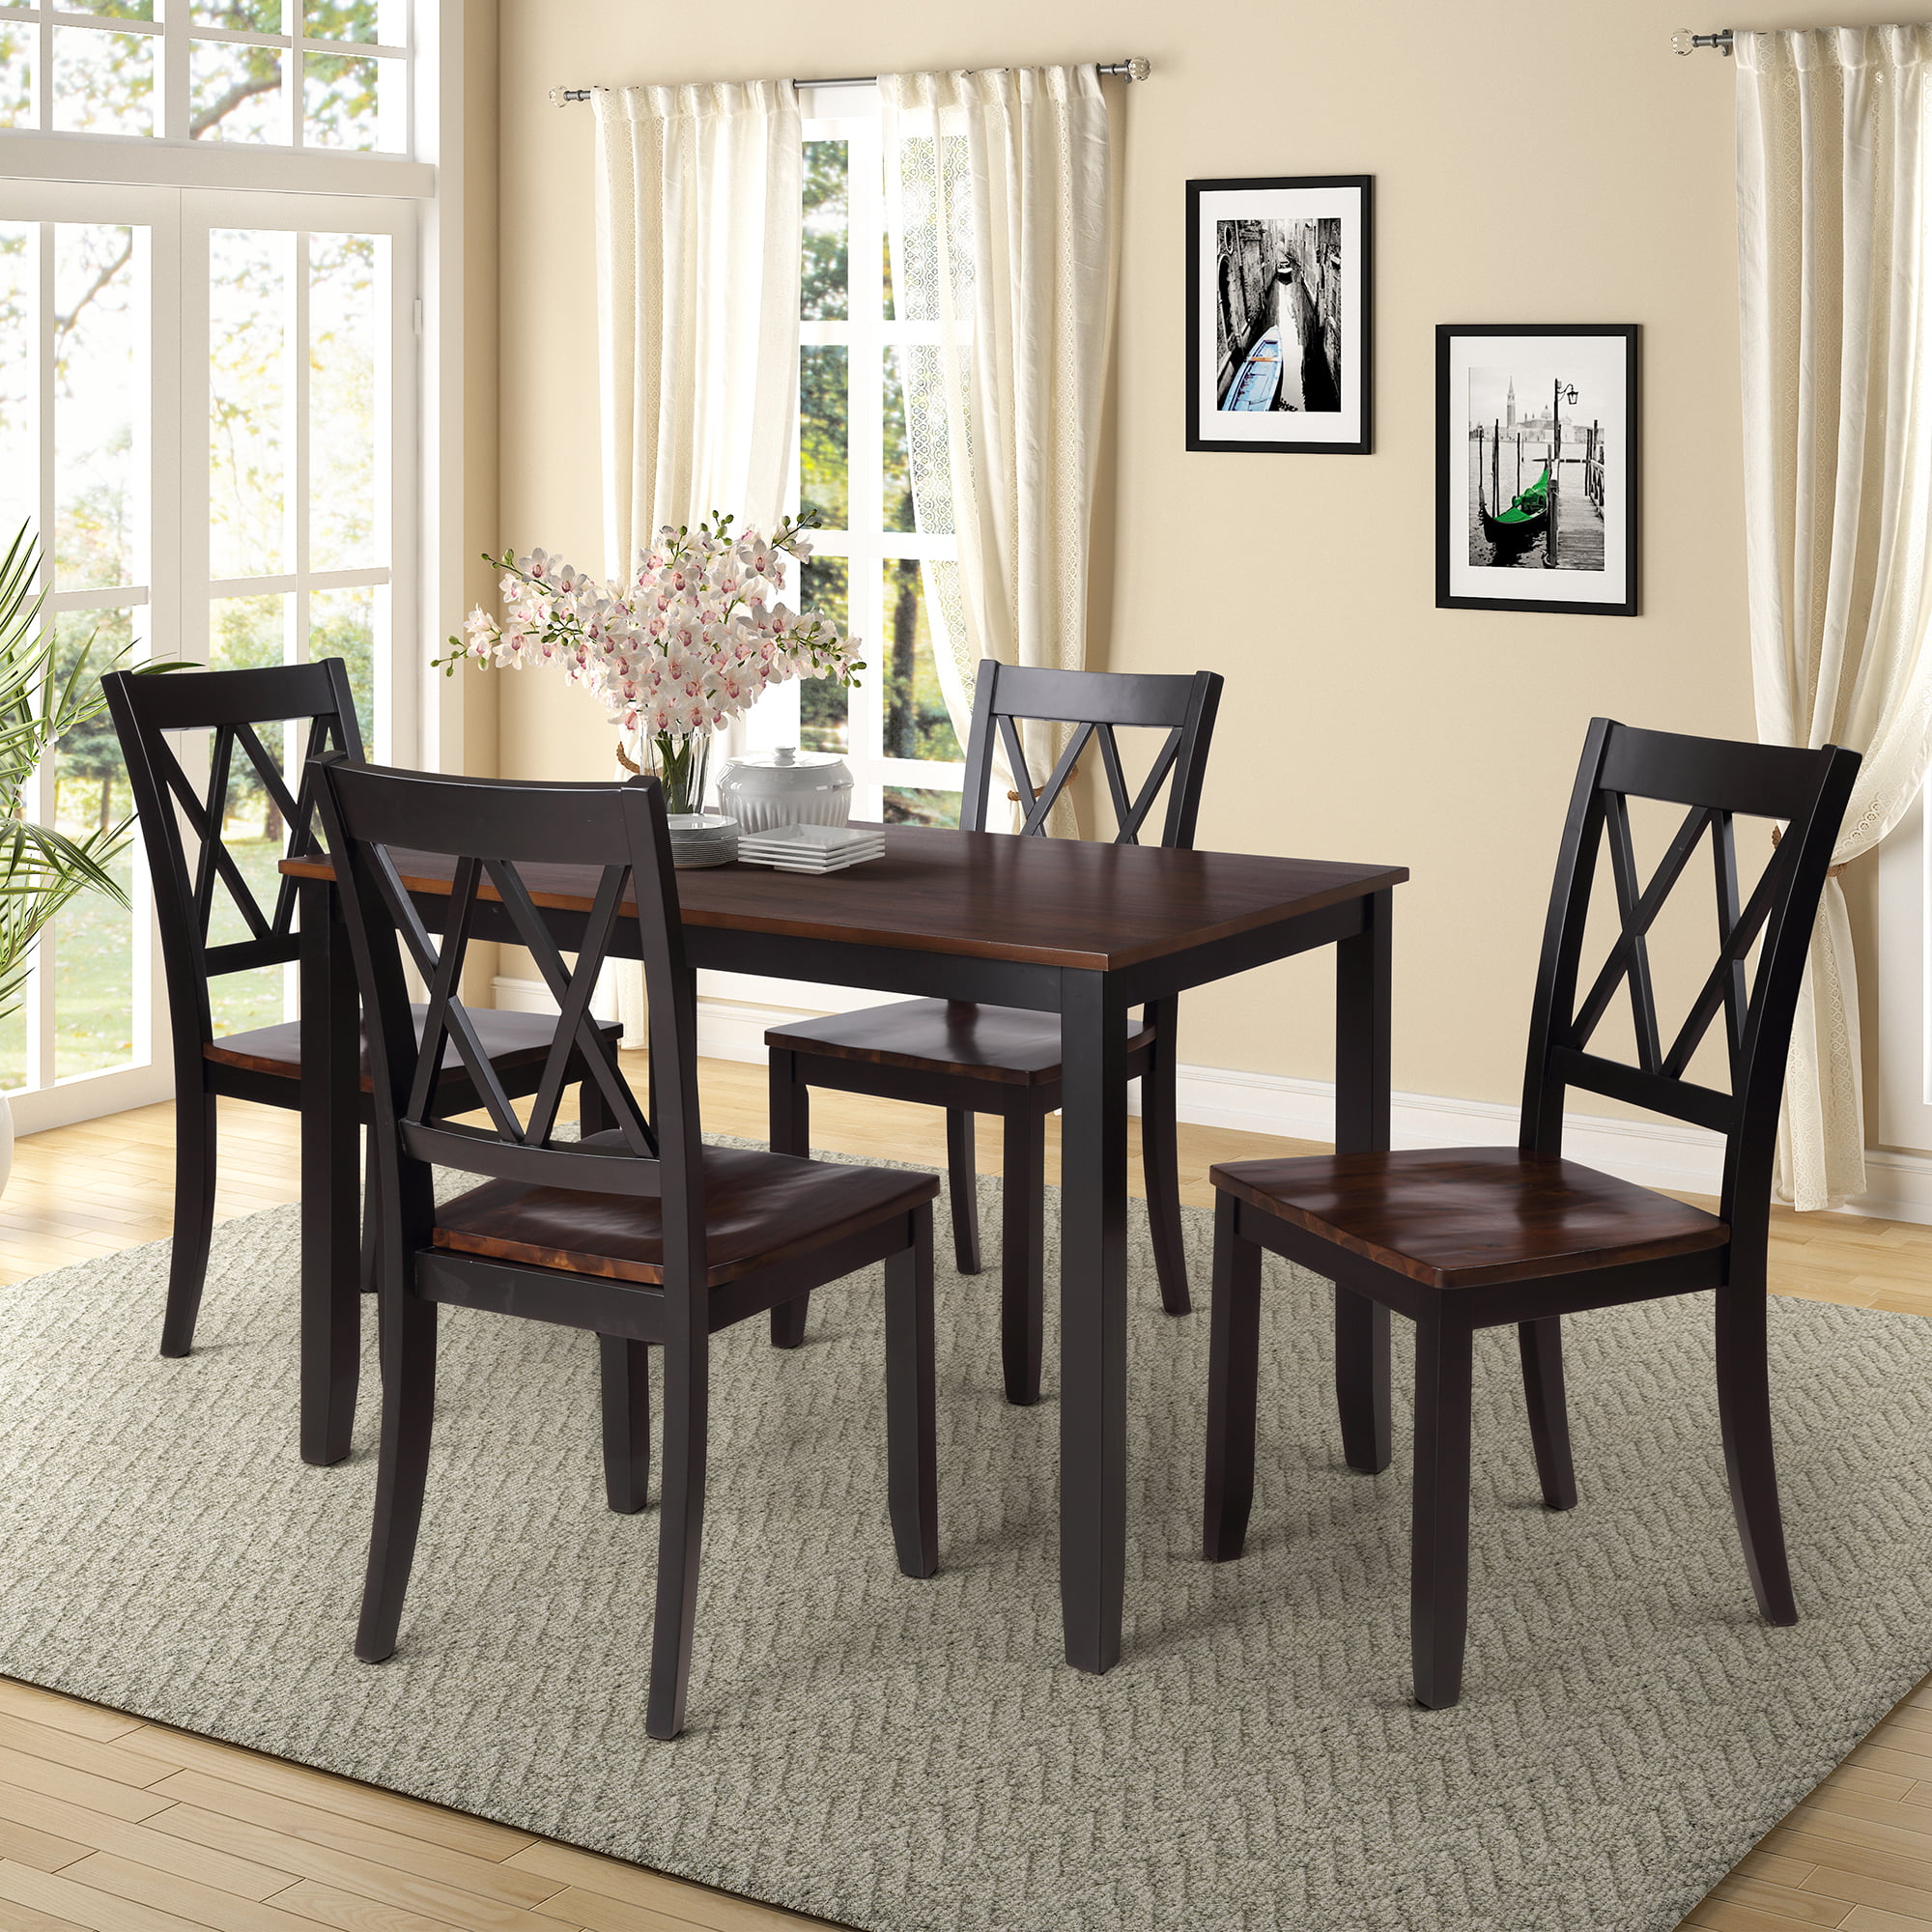 Modern 5 Piece Dining Sets, URHOMEPRO Wooden Dining Table Set for 4, Kitchen Table and 4 Chairs